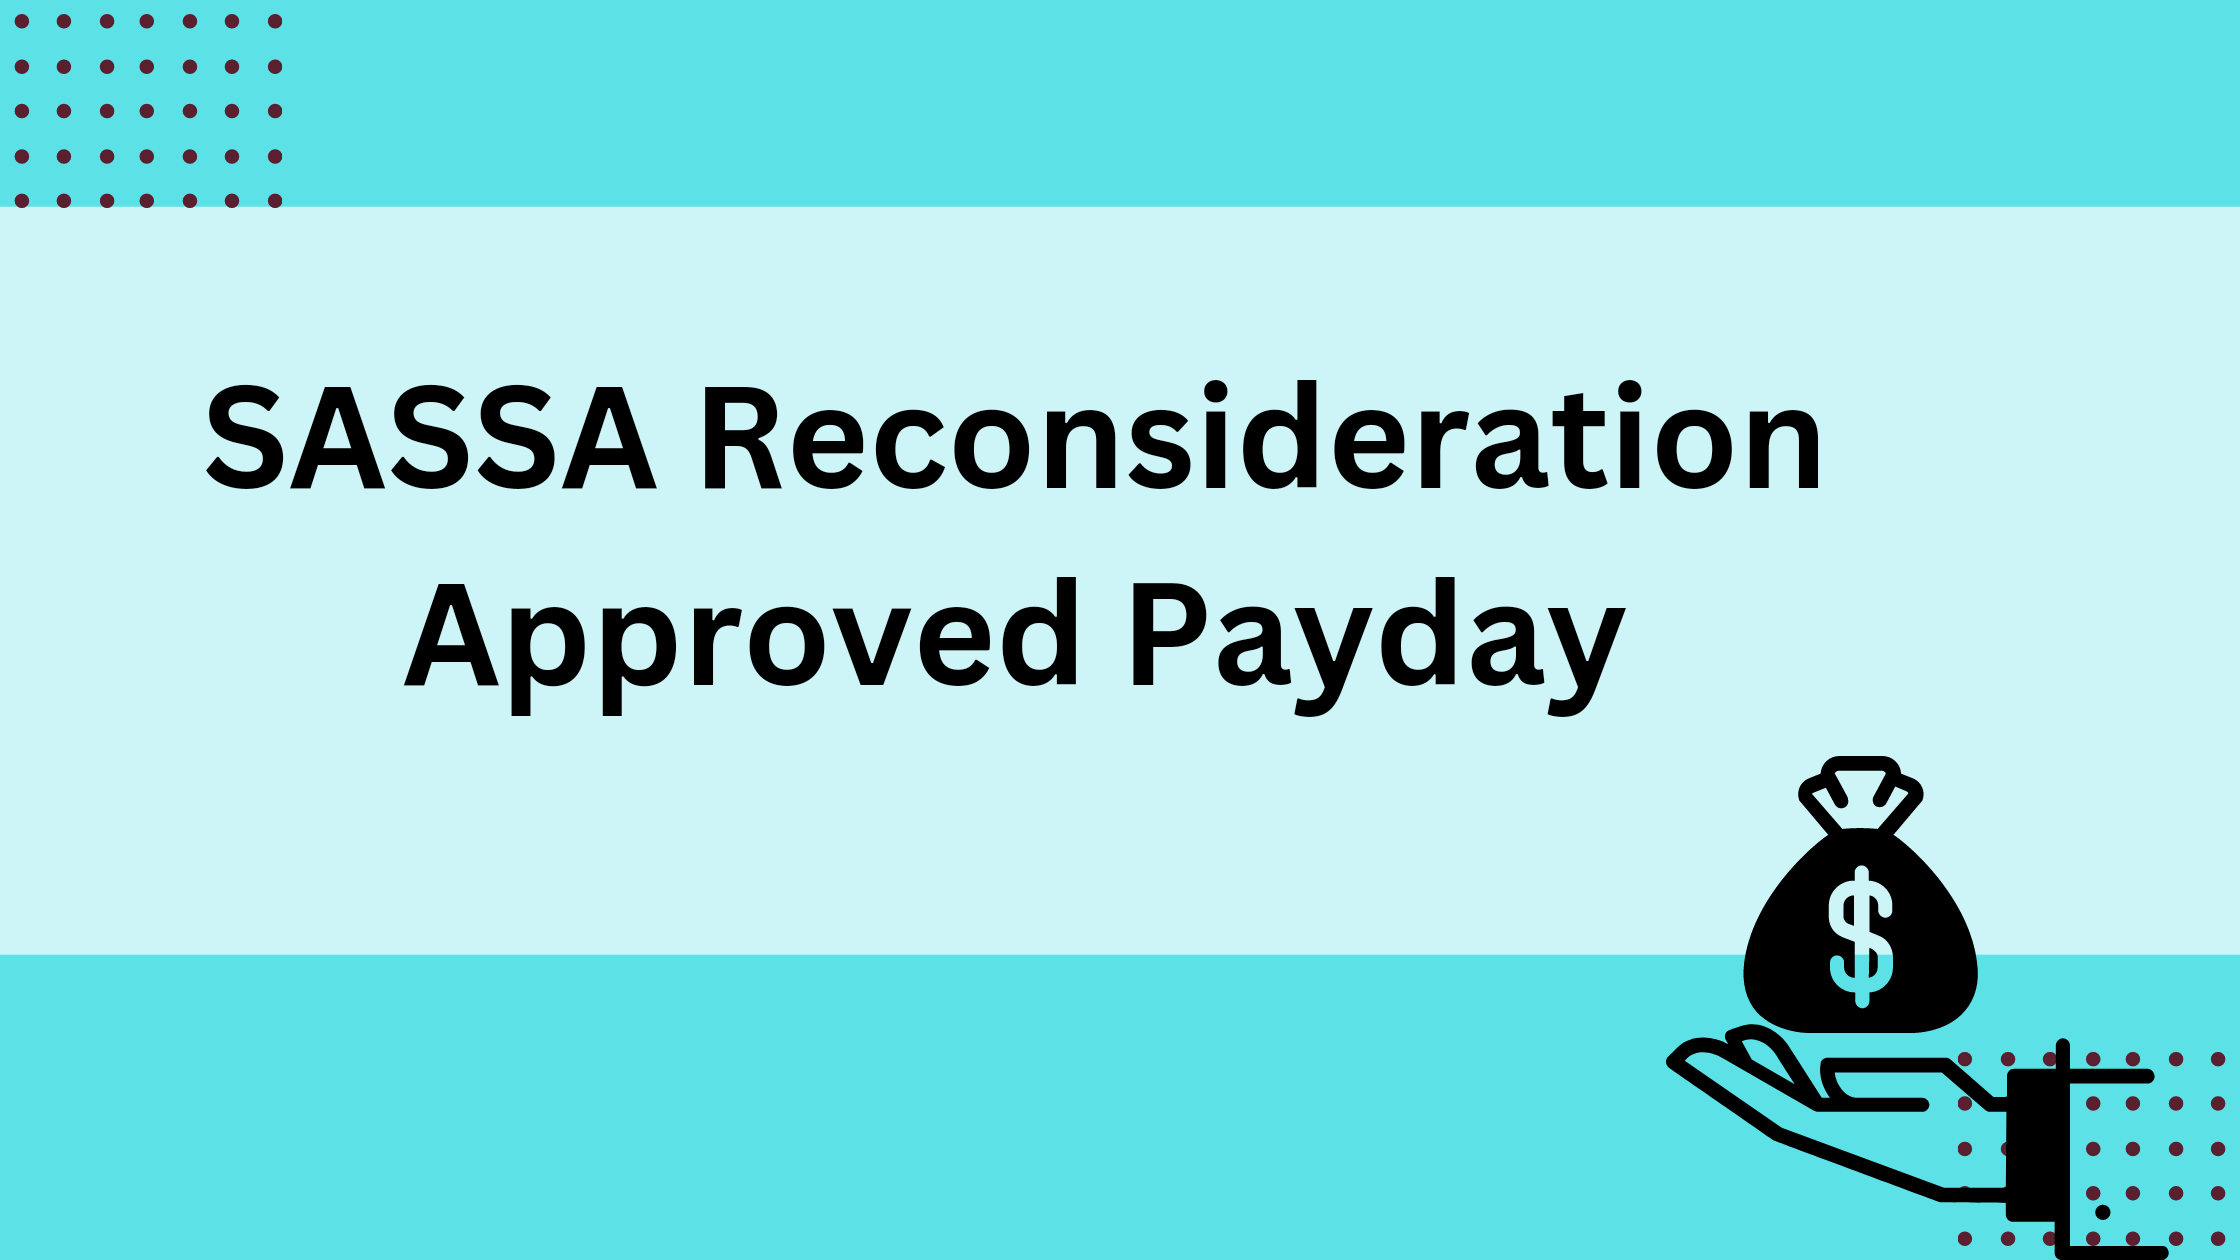 SASSA Reconsideration Approved Payday